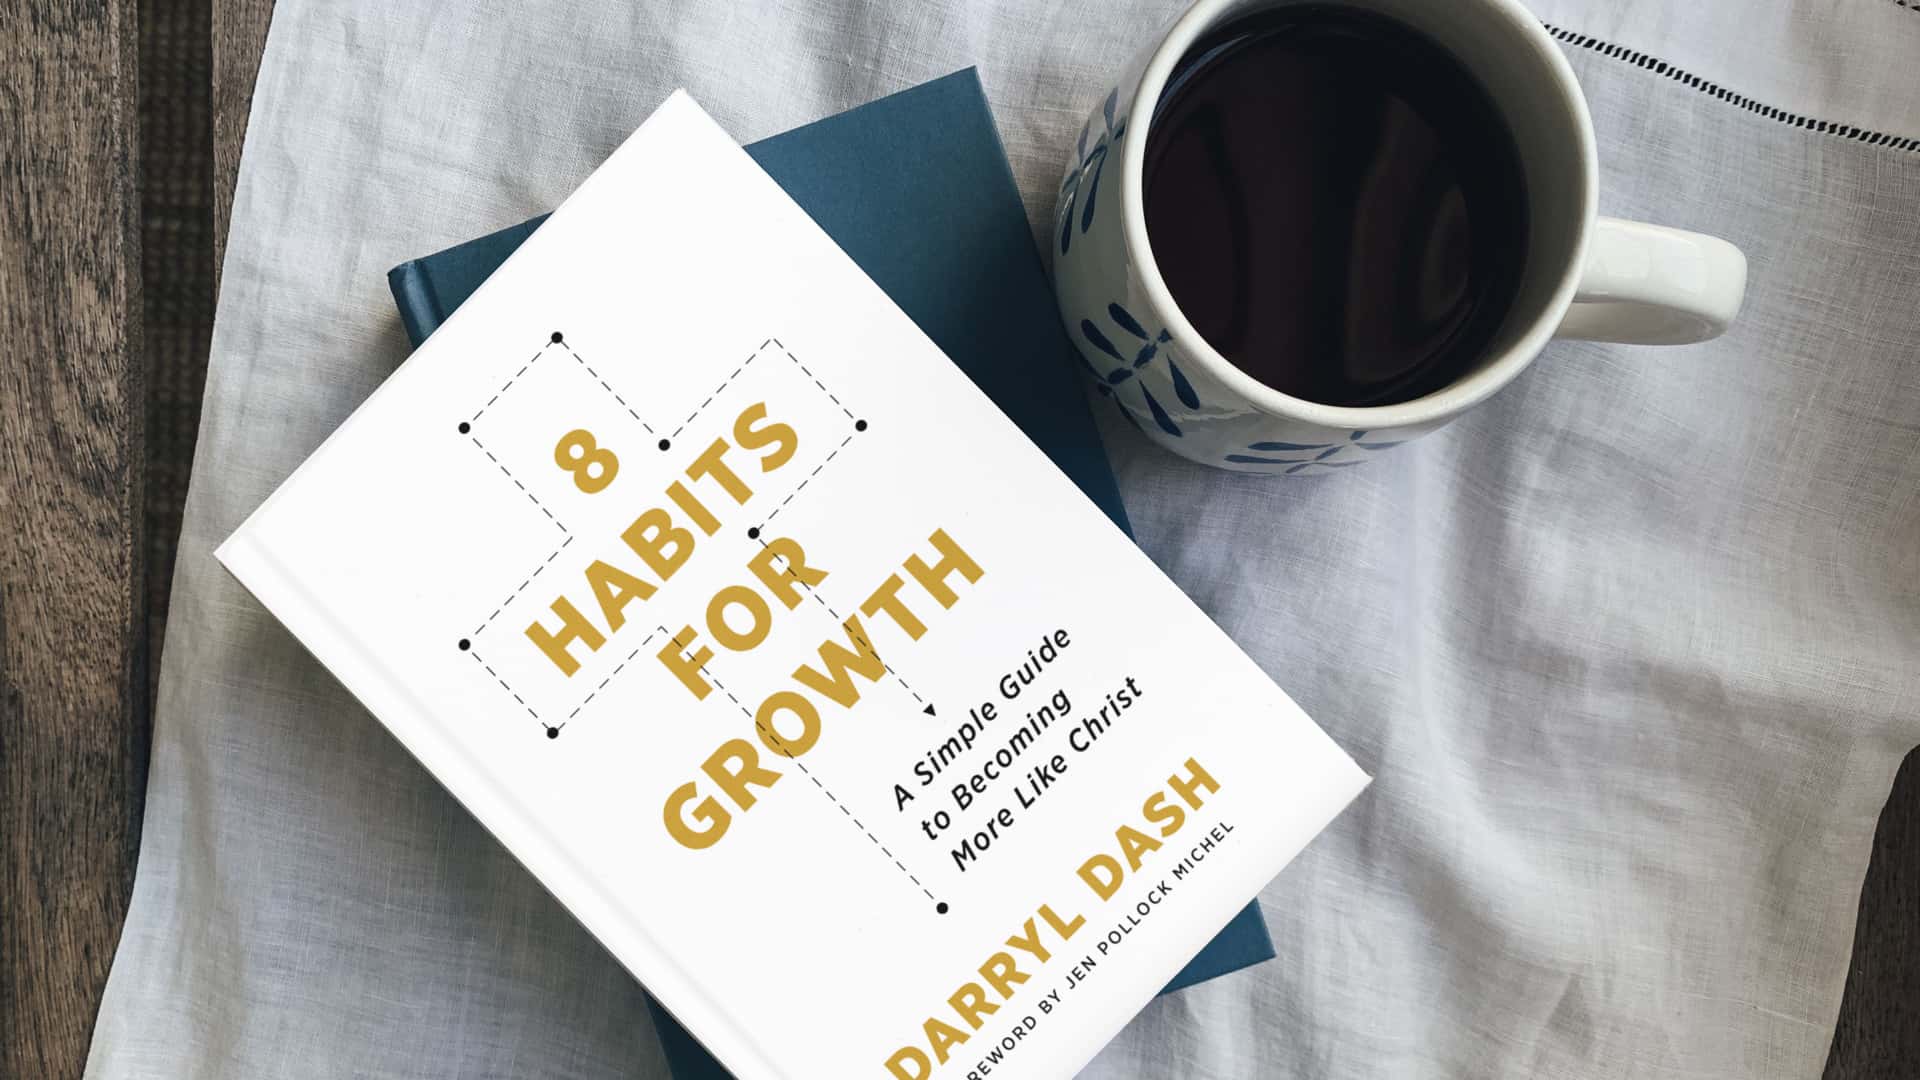 Why I Wrote 8 Habits for Growth